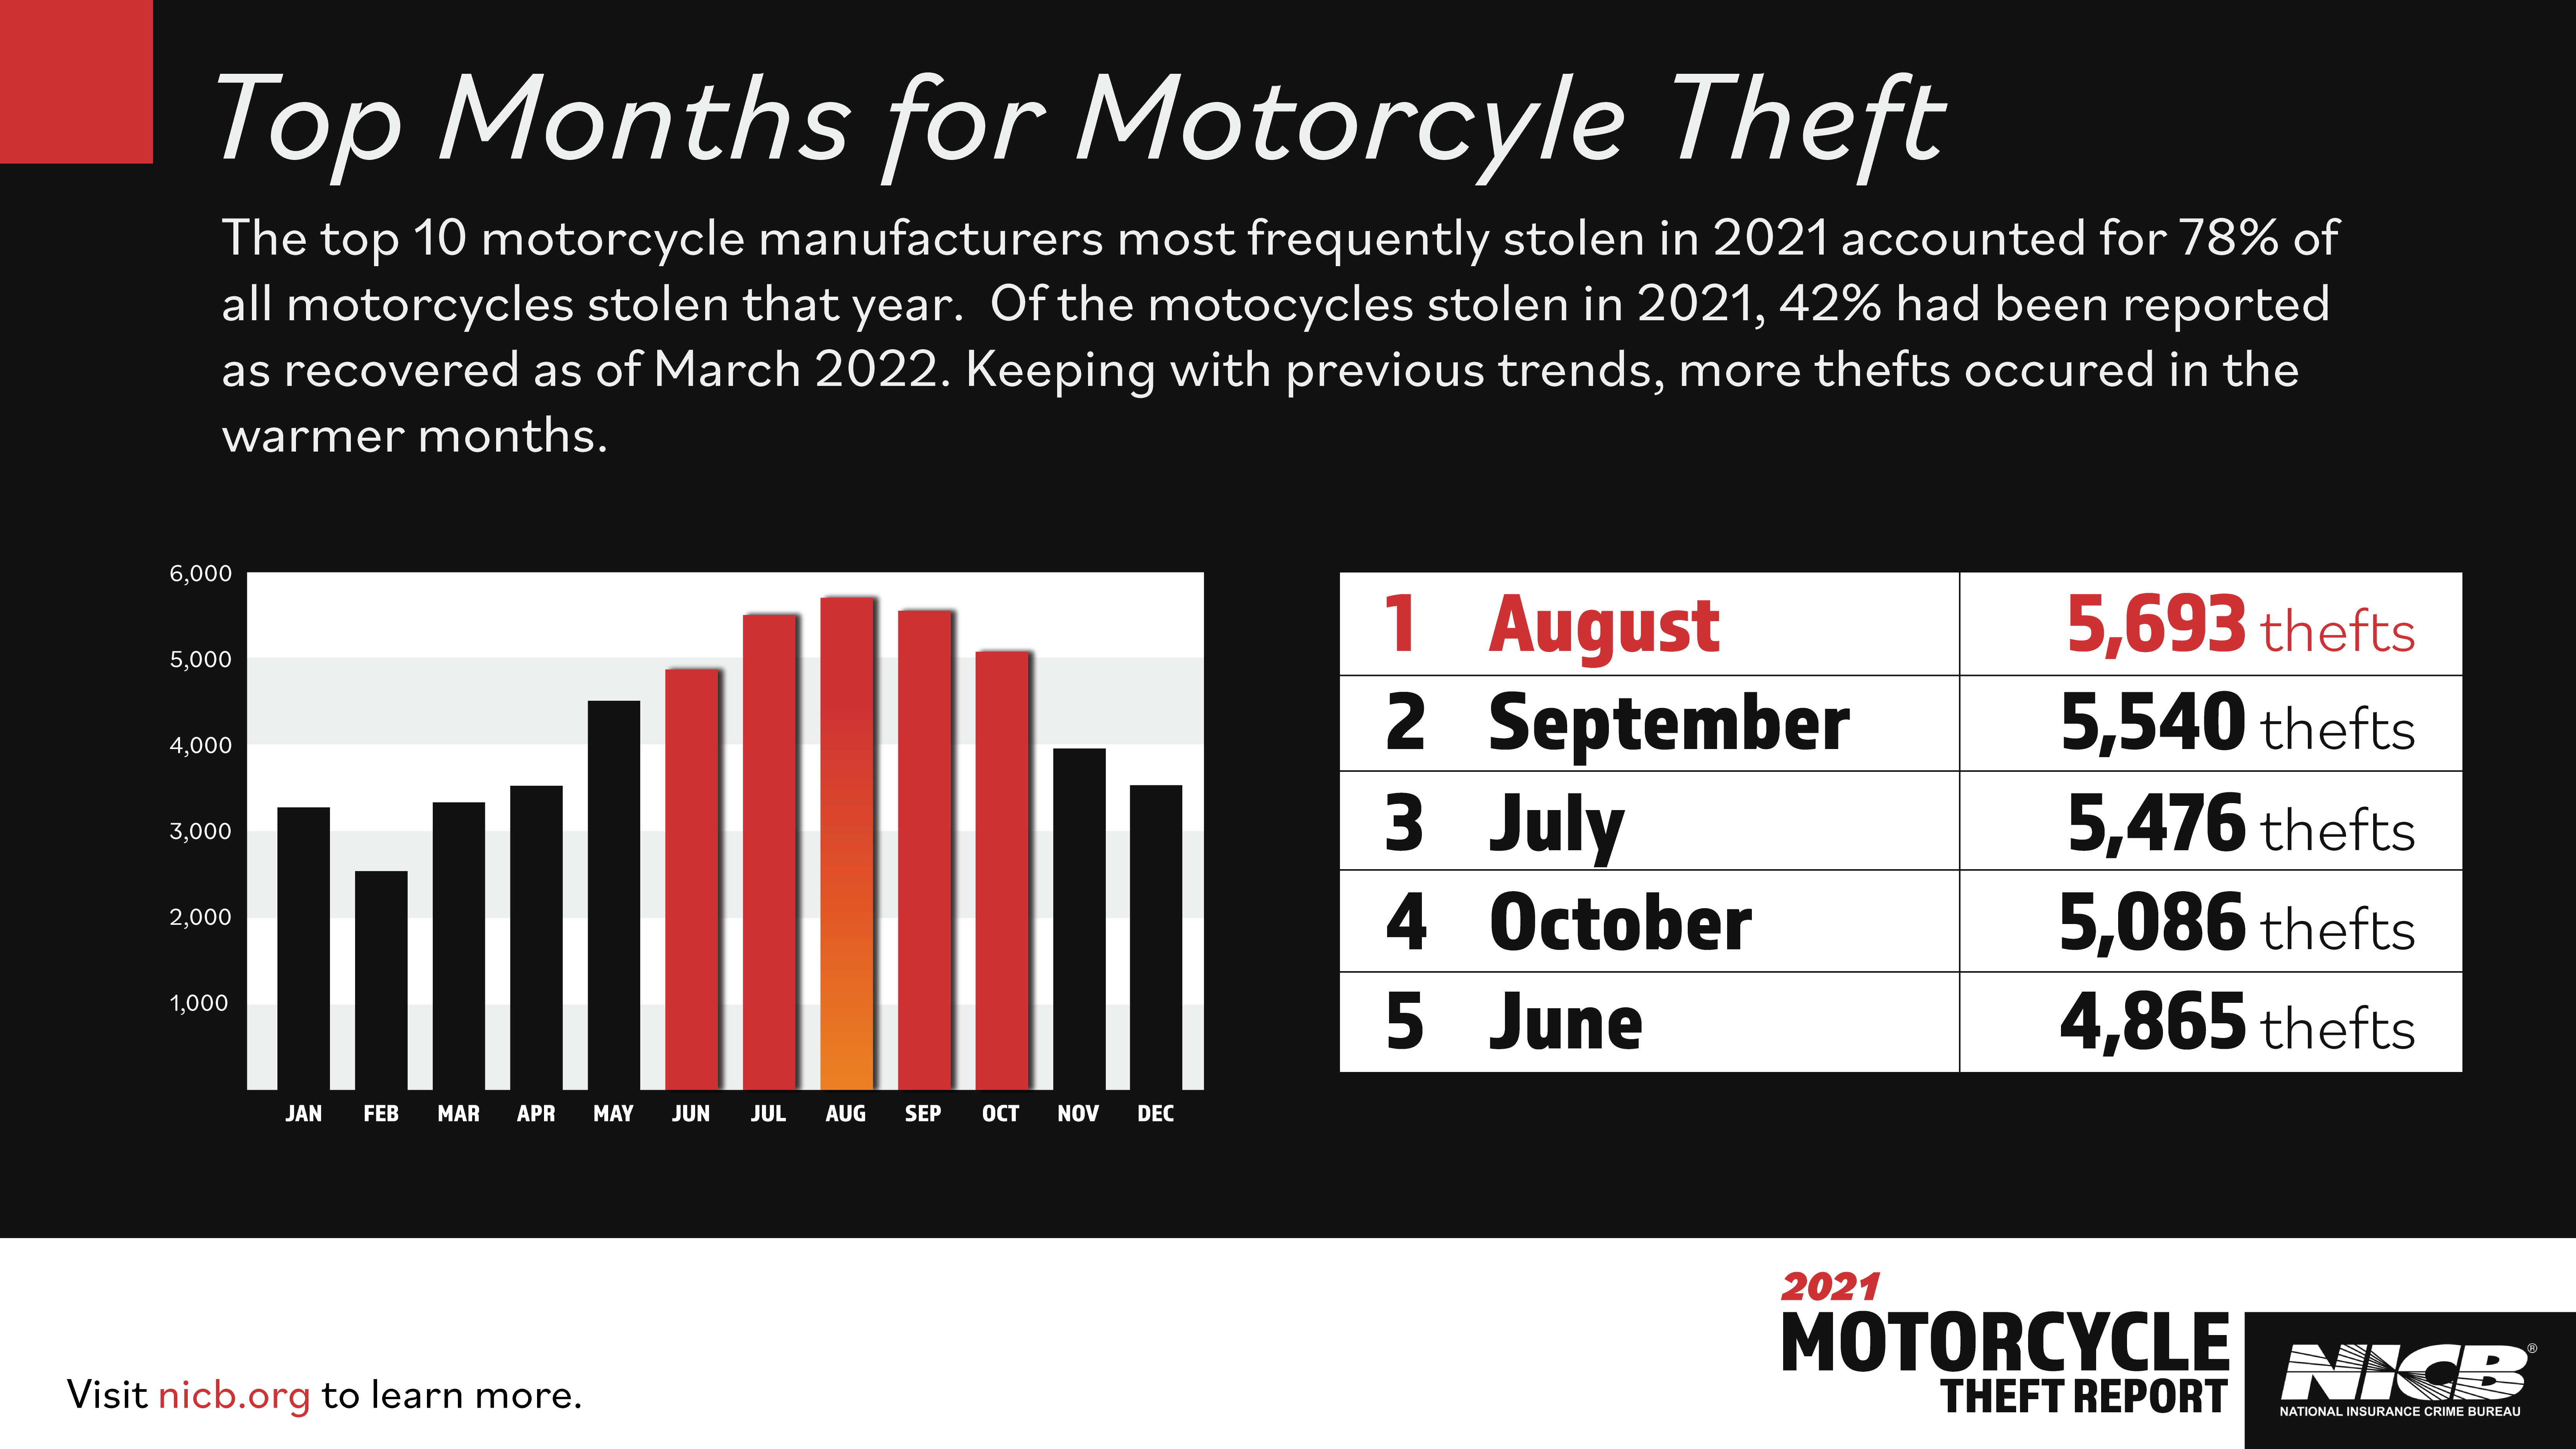 Top Months for Motorcycle Theft